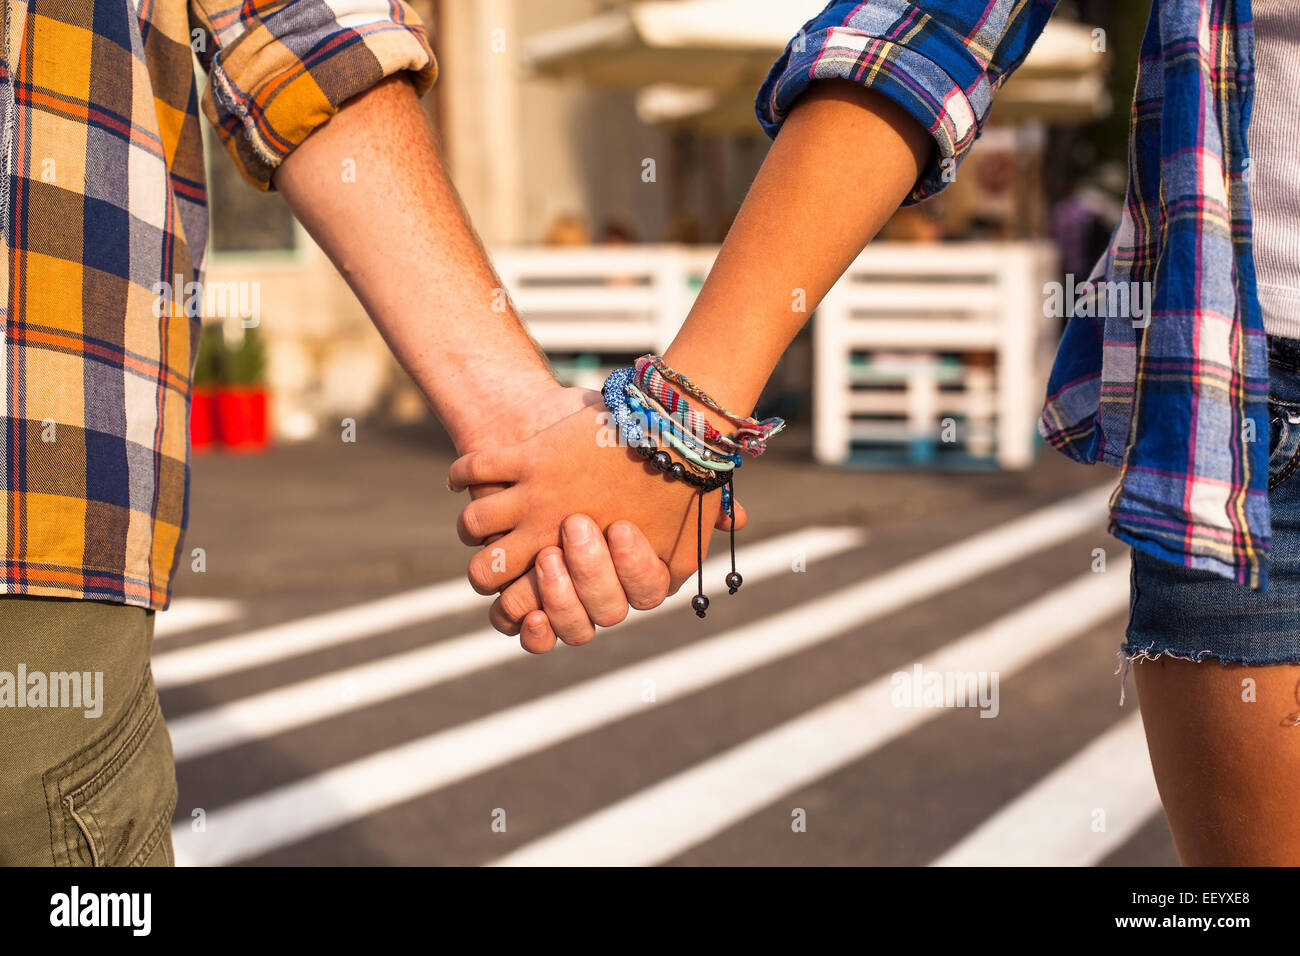 Young couple walking in the City holding hands, close-up. Stock Photo